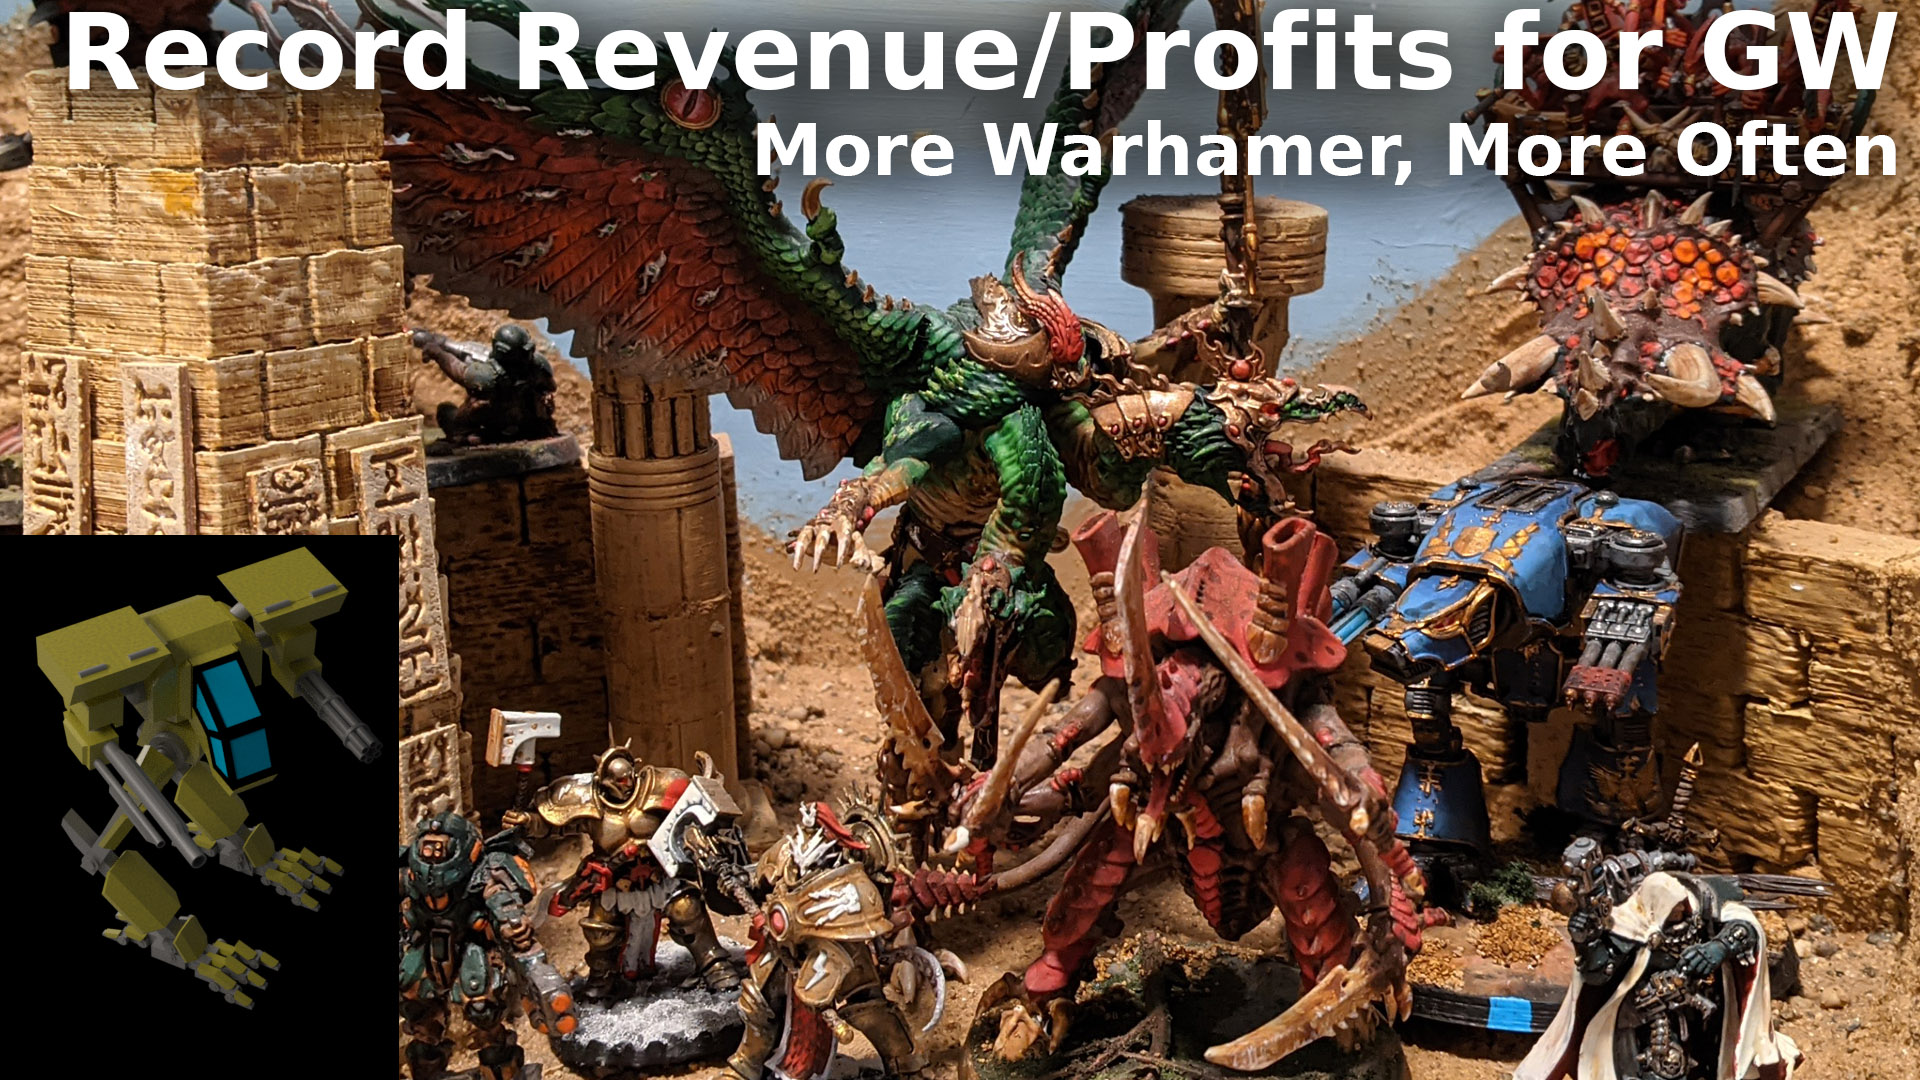 The Tabletop Battlefield Record Profits for Games